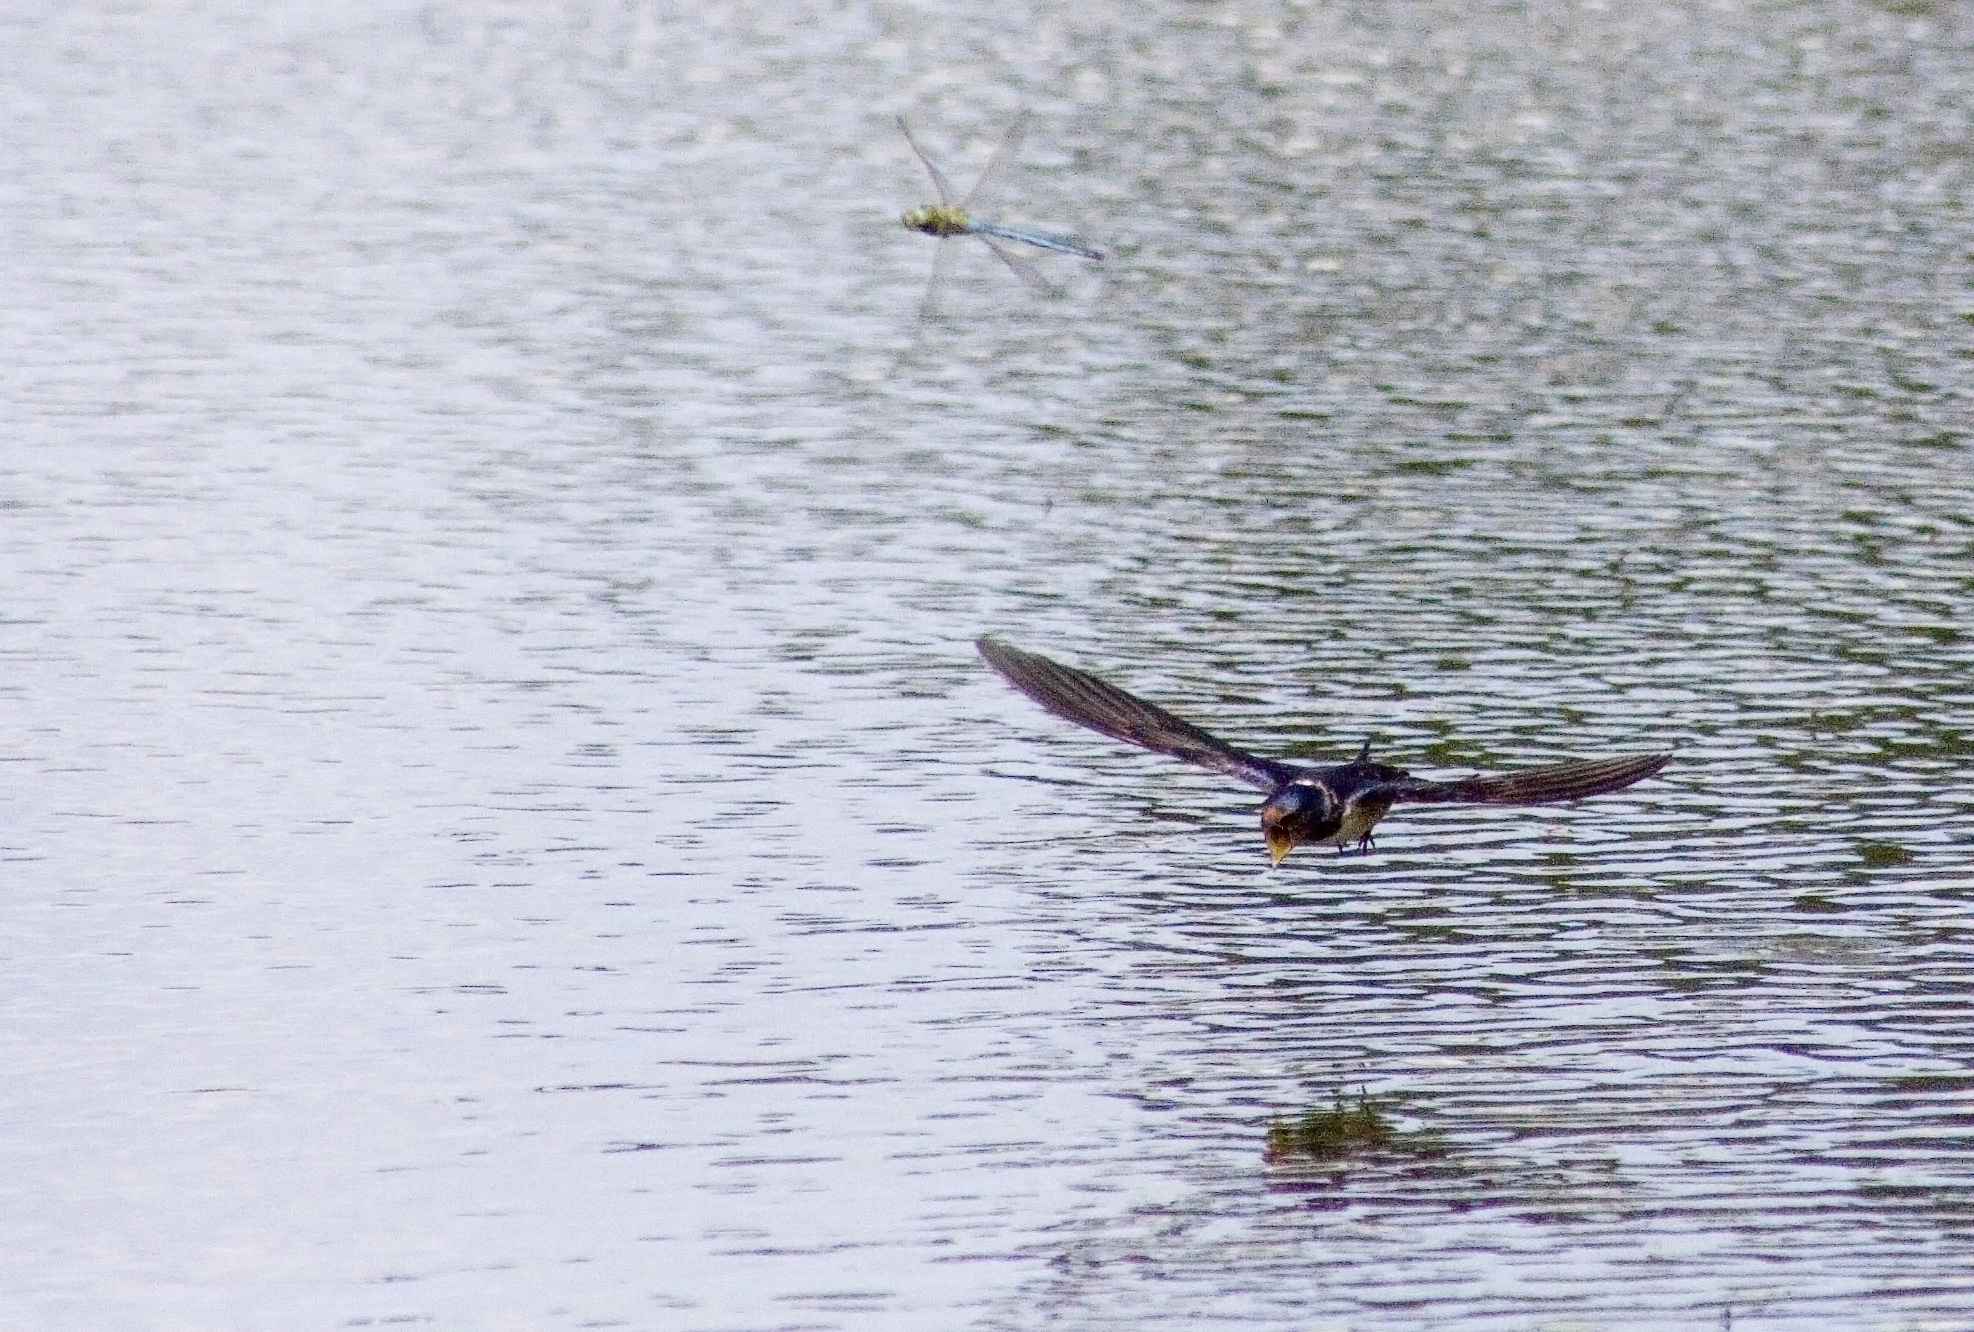 a bird is gliding low over the water